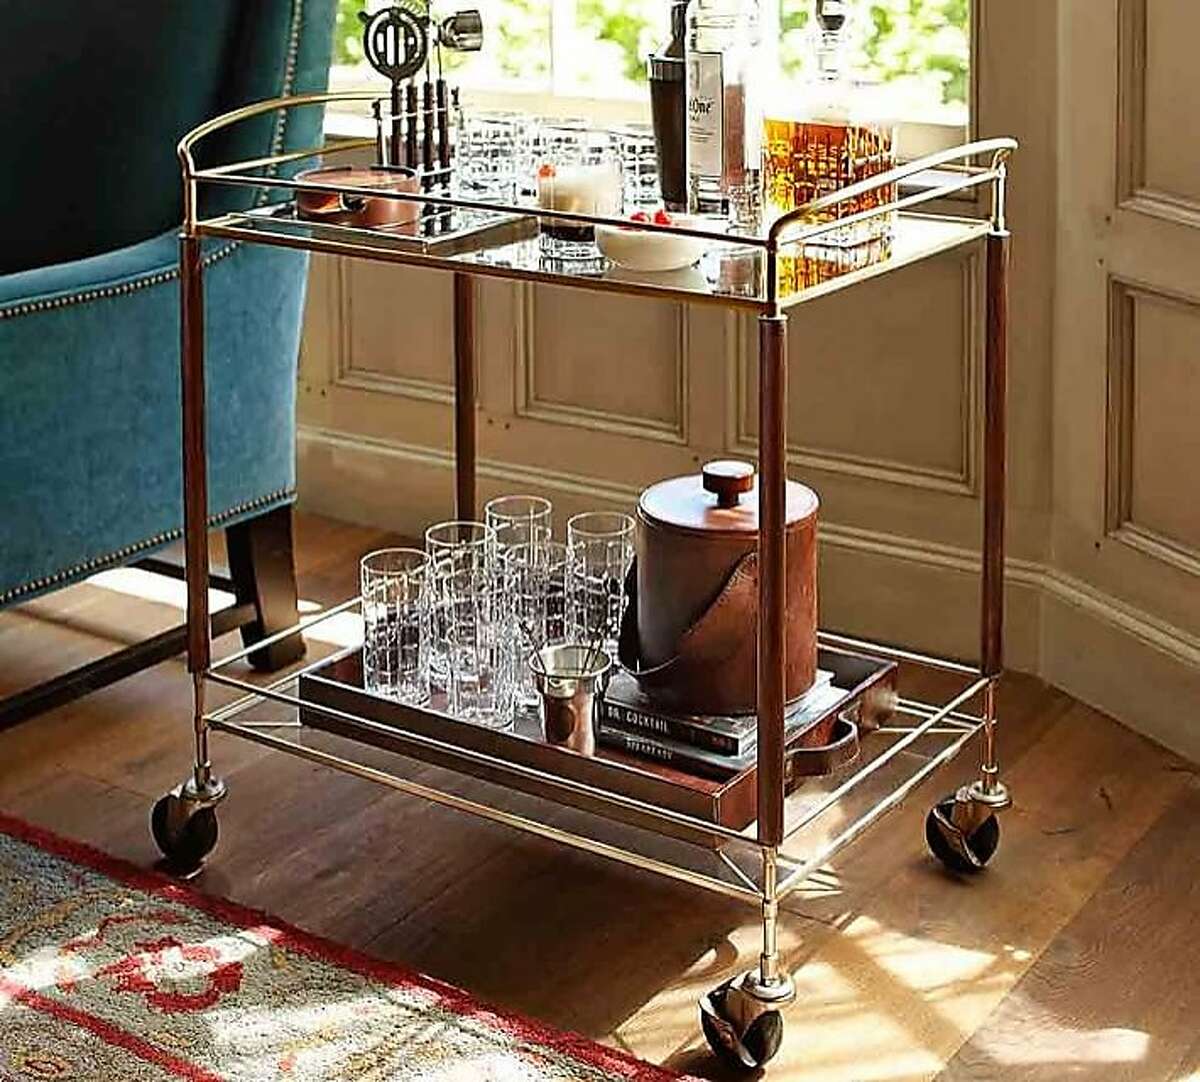 The Brady bar cart at Pottery Barn retails for $399.